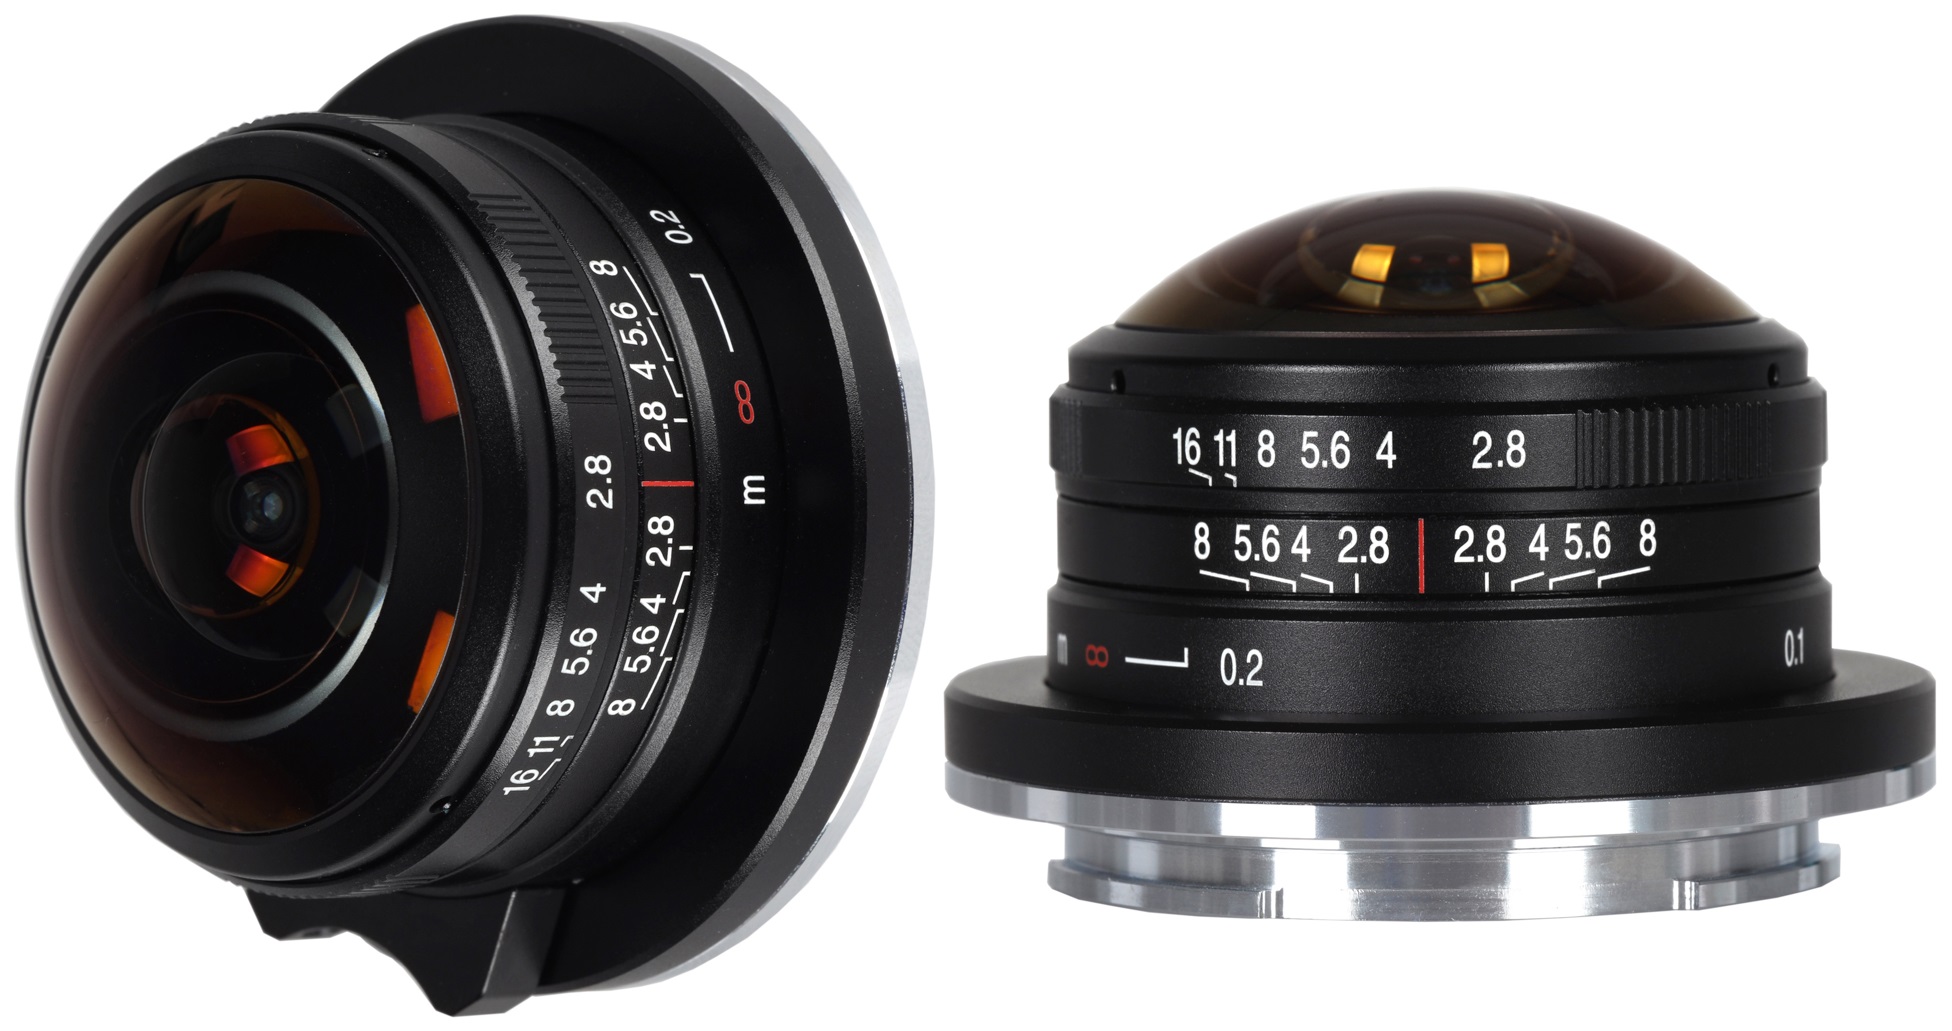 Laowa 4mm f/2.8 Fisheye Lens Now Available for EF-M-, X- and E-Mount | CineD